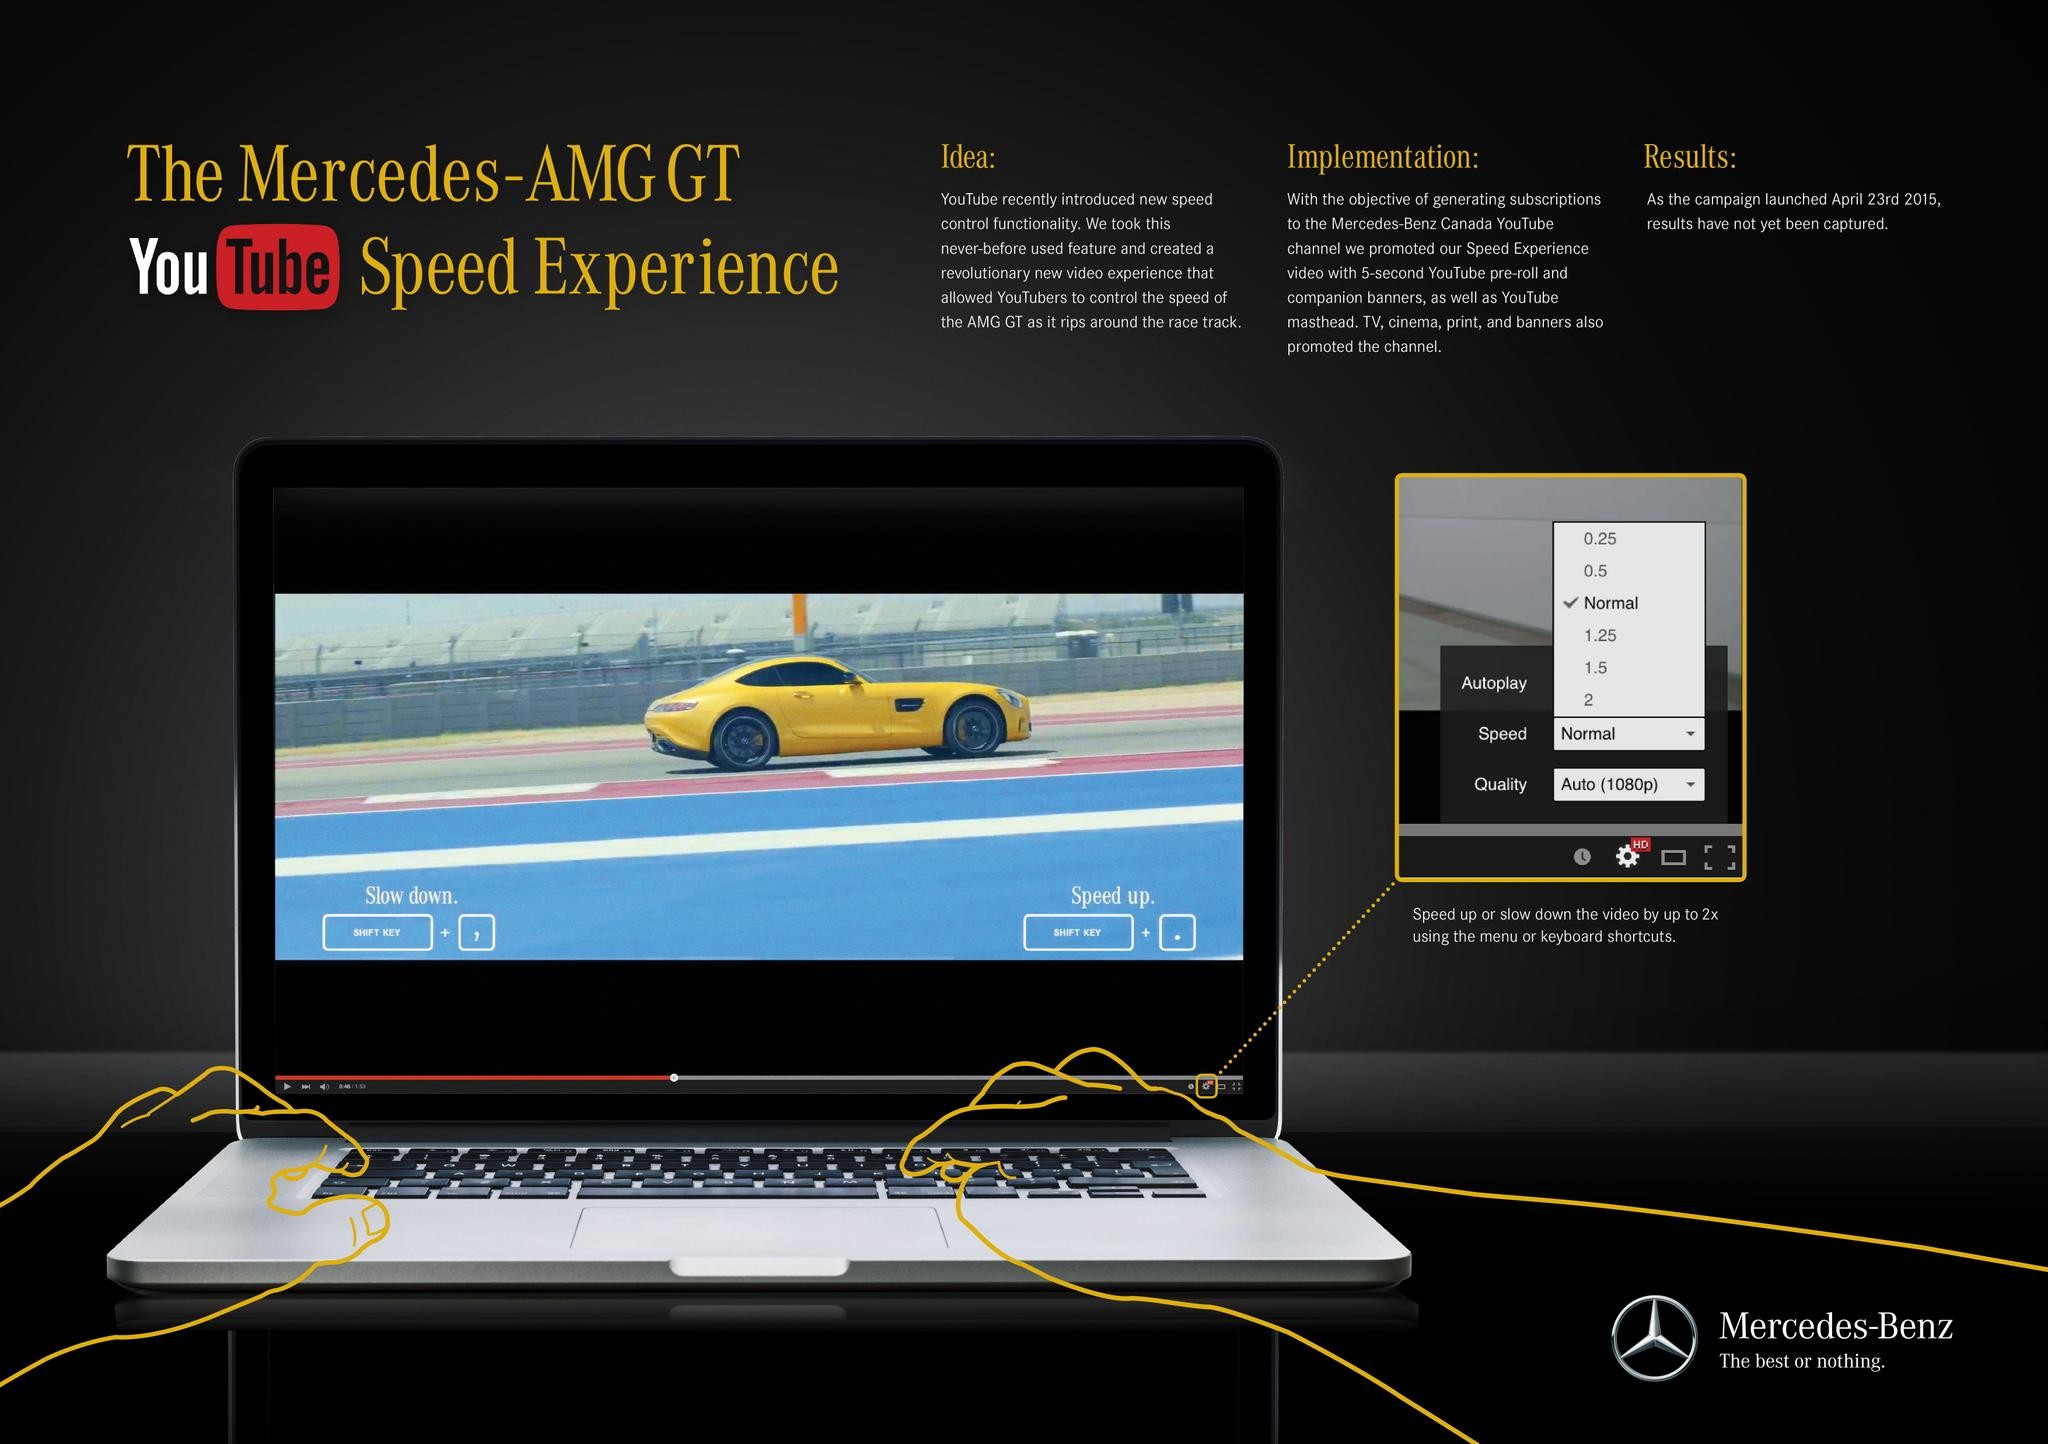 THE MERCEDES-AMG GT SPEED EXPERIENCE